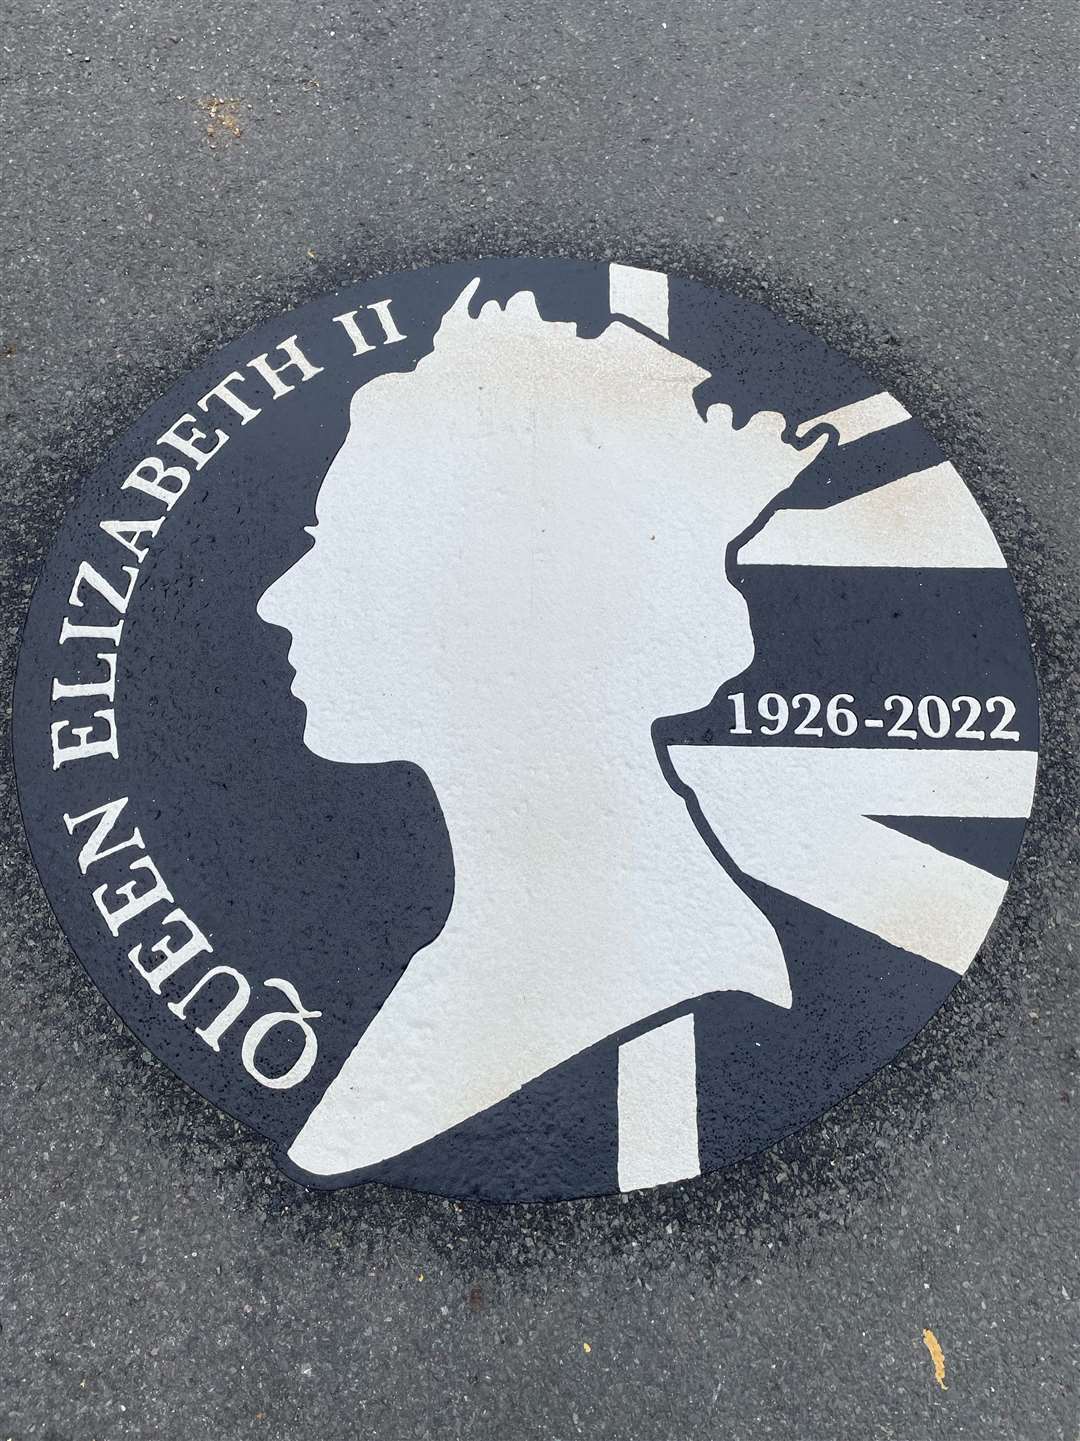 Artwork in memory of the Queen was emblazoned overnight on streets in Sole Street, Cobham and Meopham